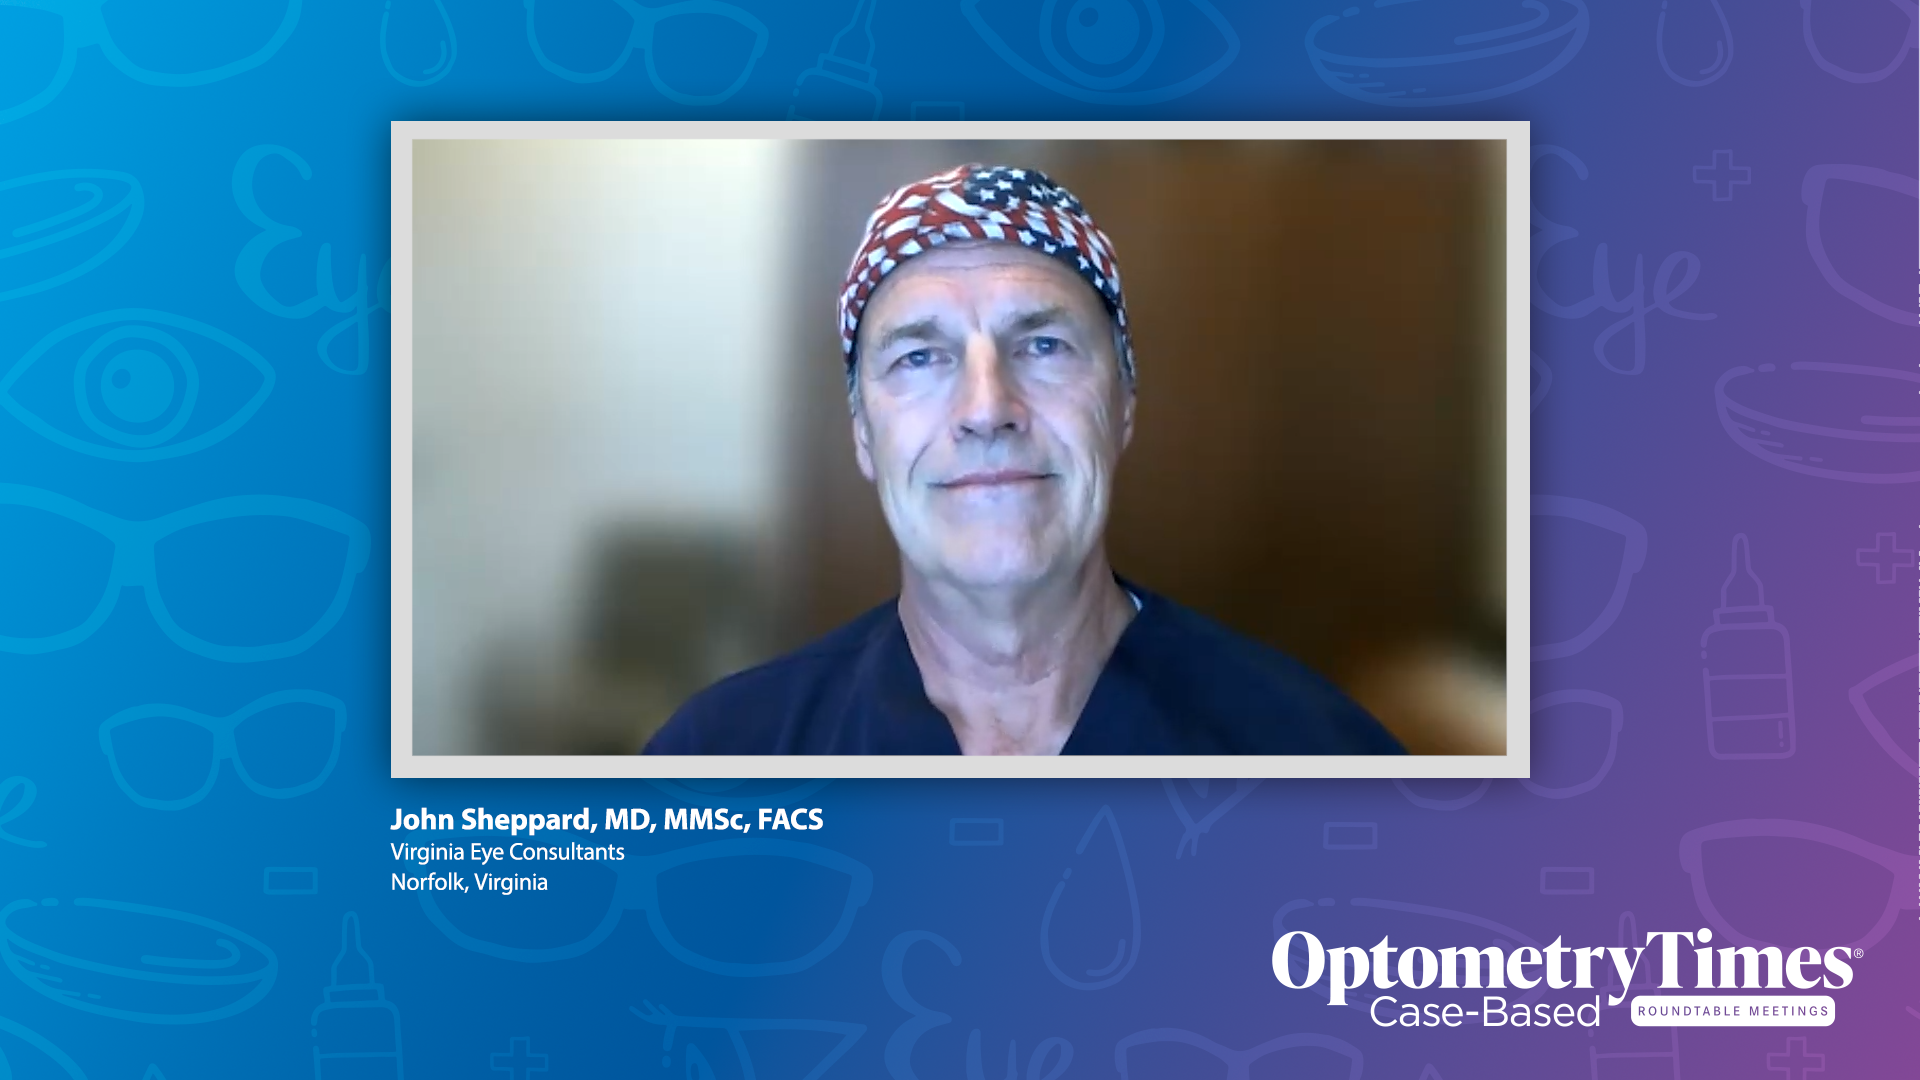 Patient Case No. 2: Managing Evaporative Dry Eye Without Relying on Artificial Tears